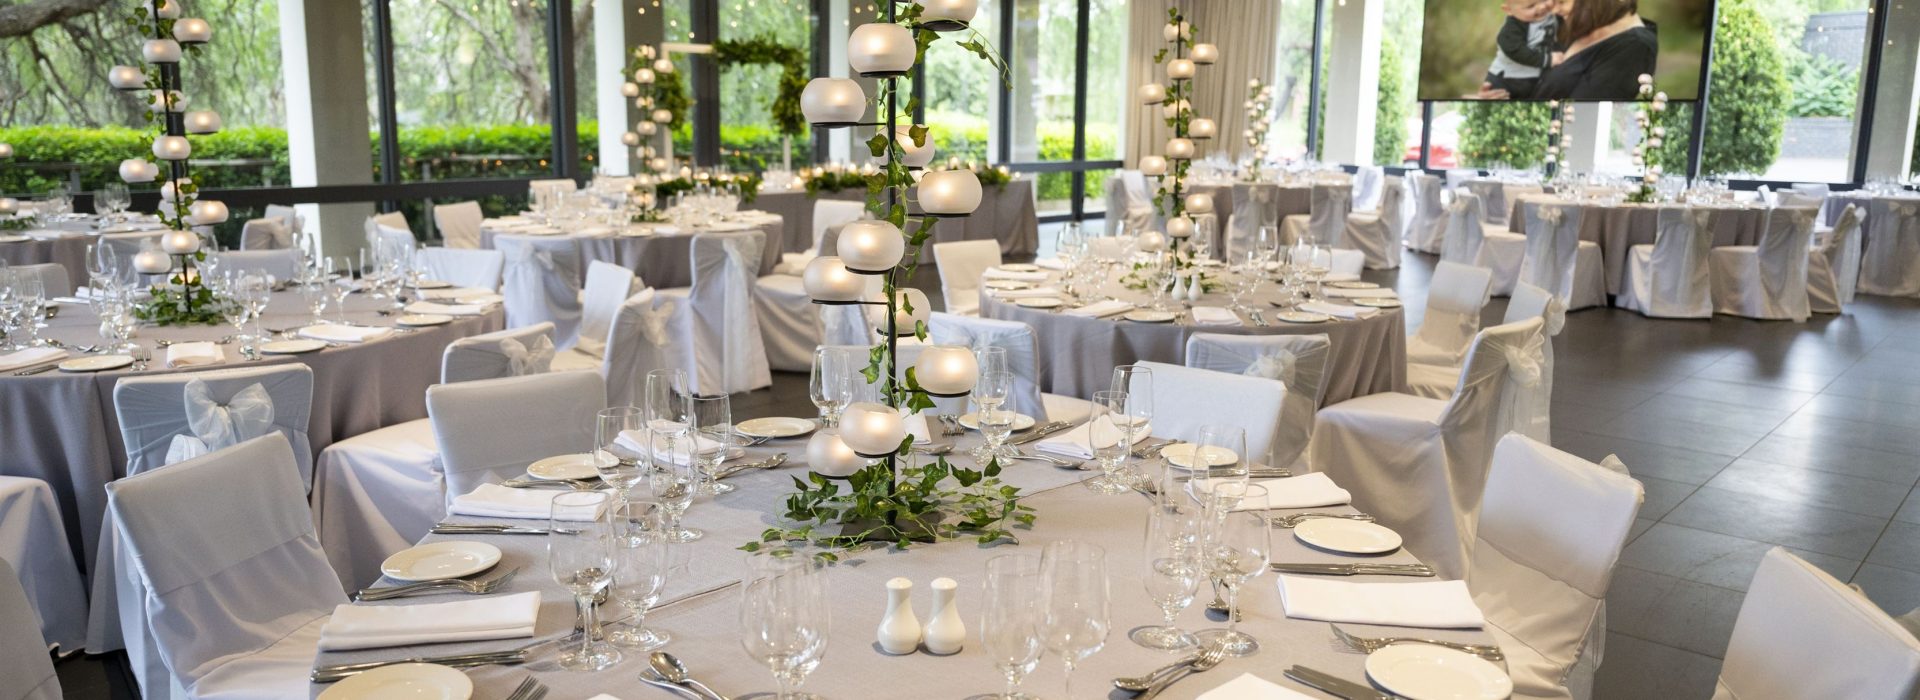 Elegant wedding reception room in Melbourne with grey linens and stunning large windows.